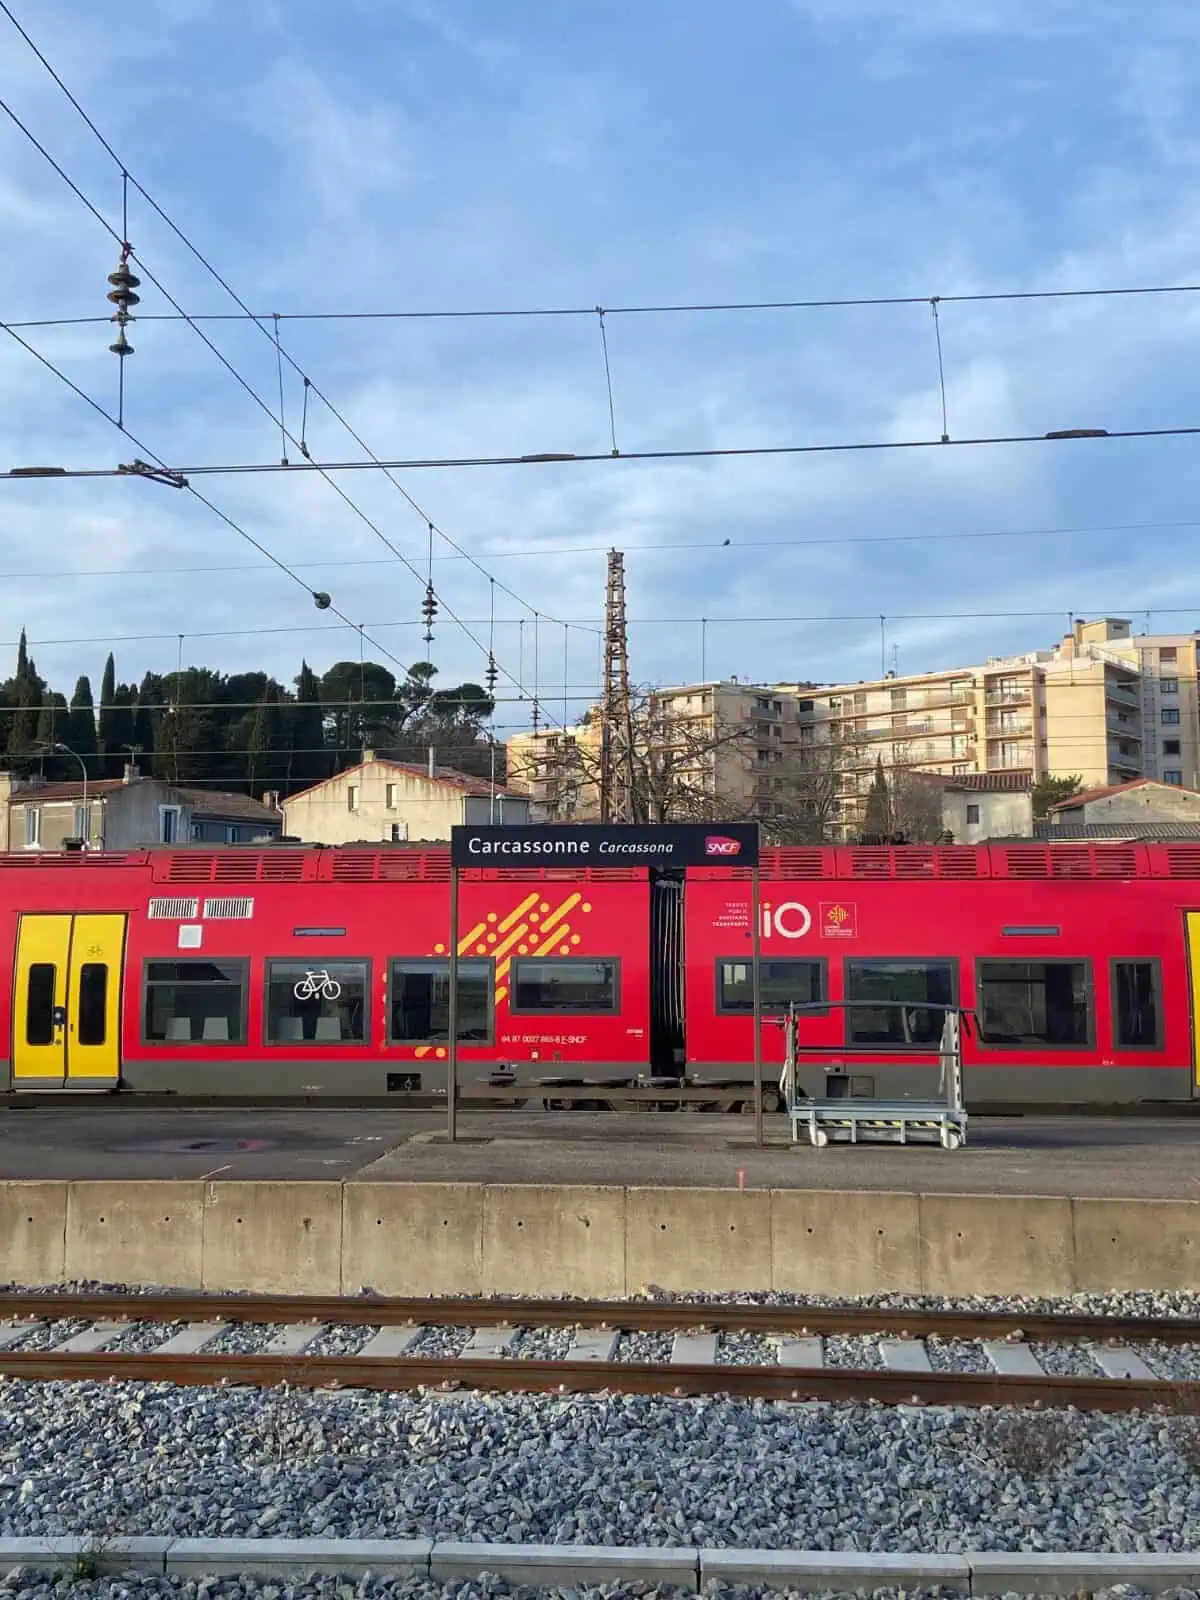 Carcassonne train station in France with red train cars in the background on the tracks